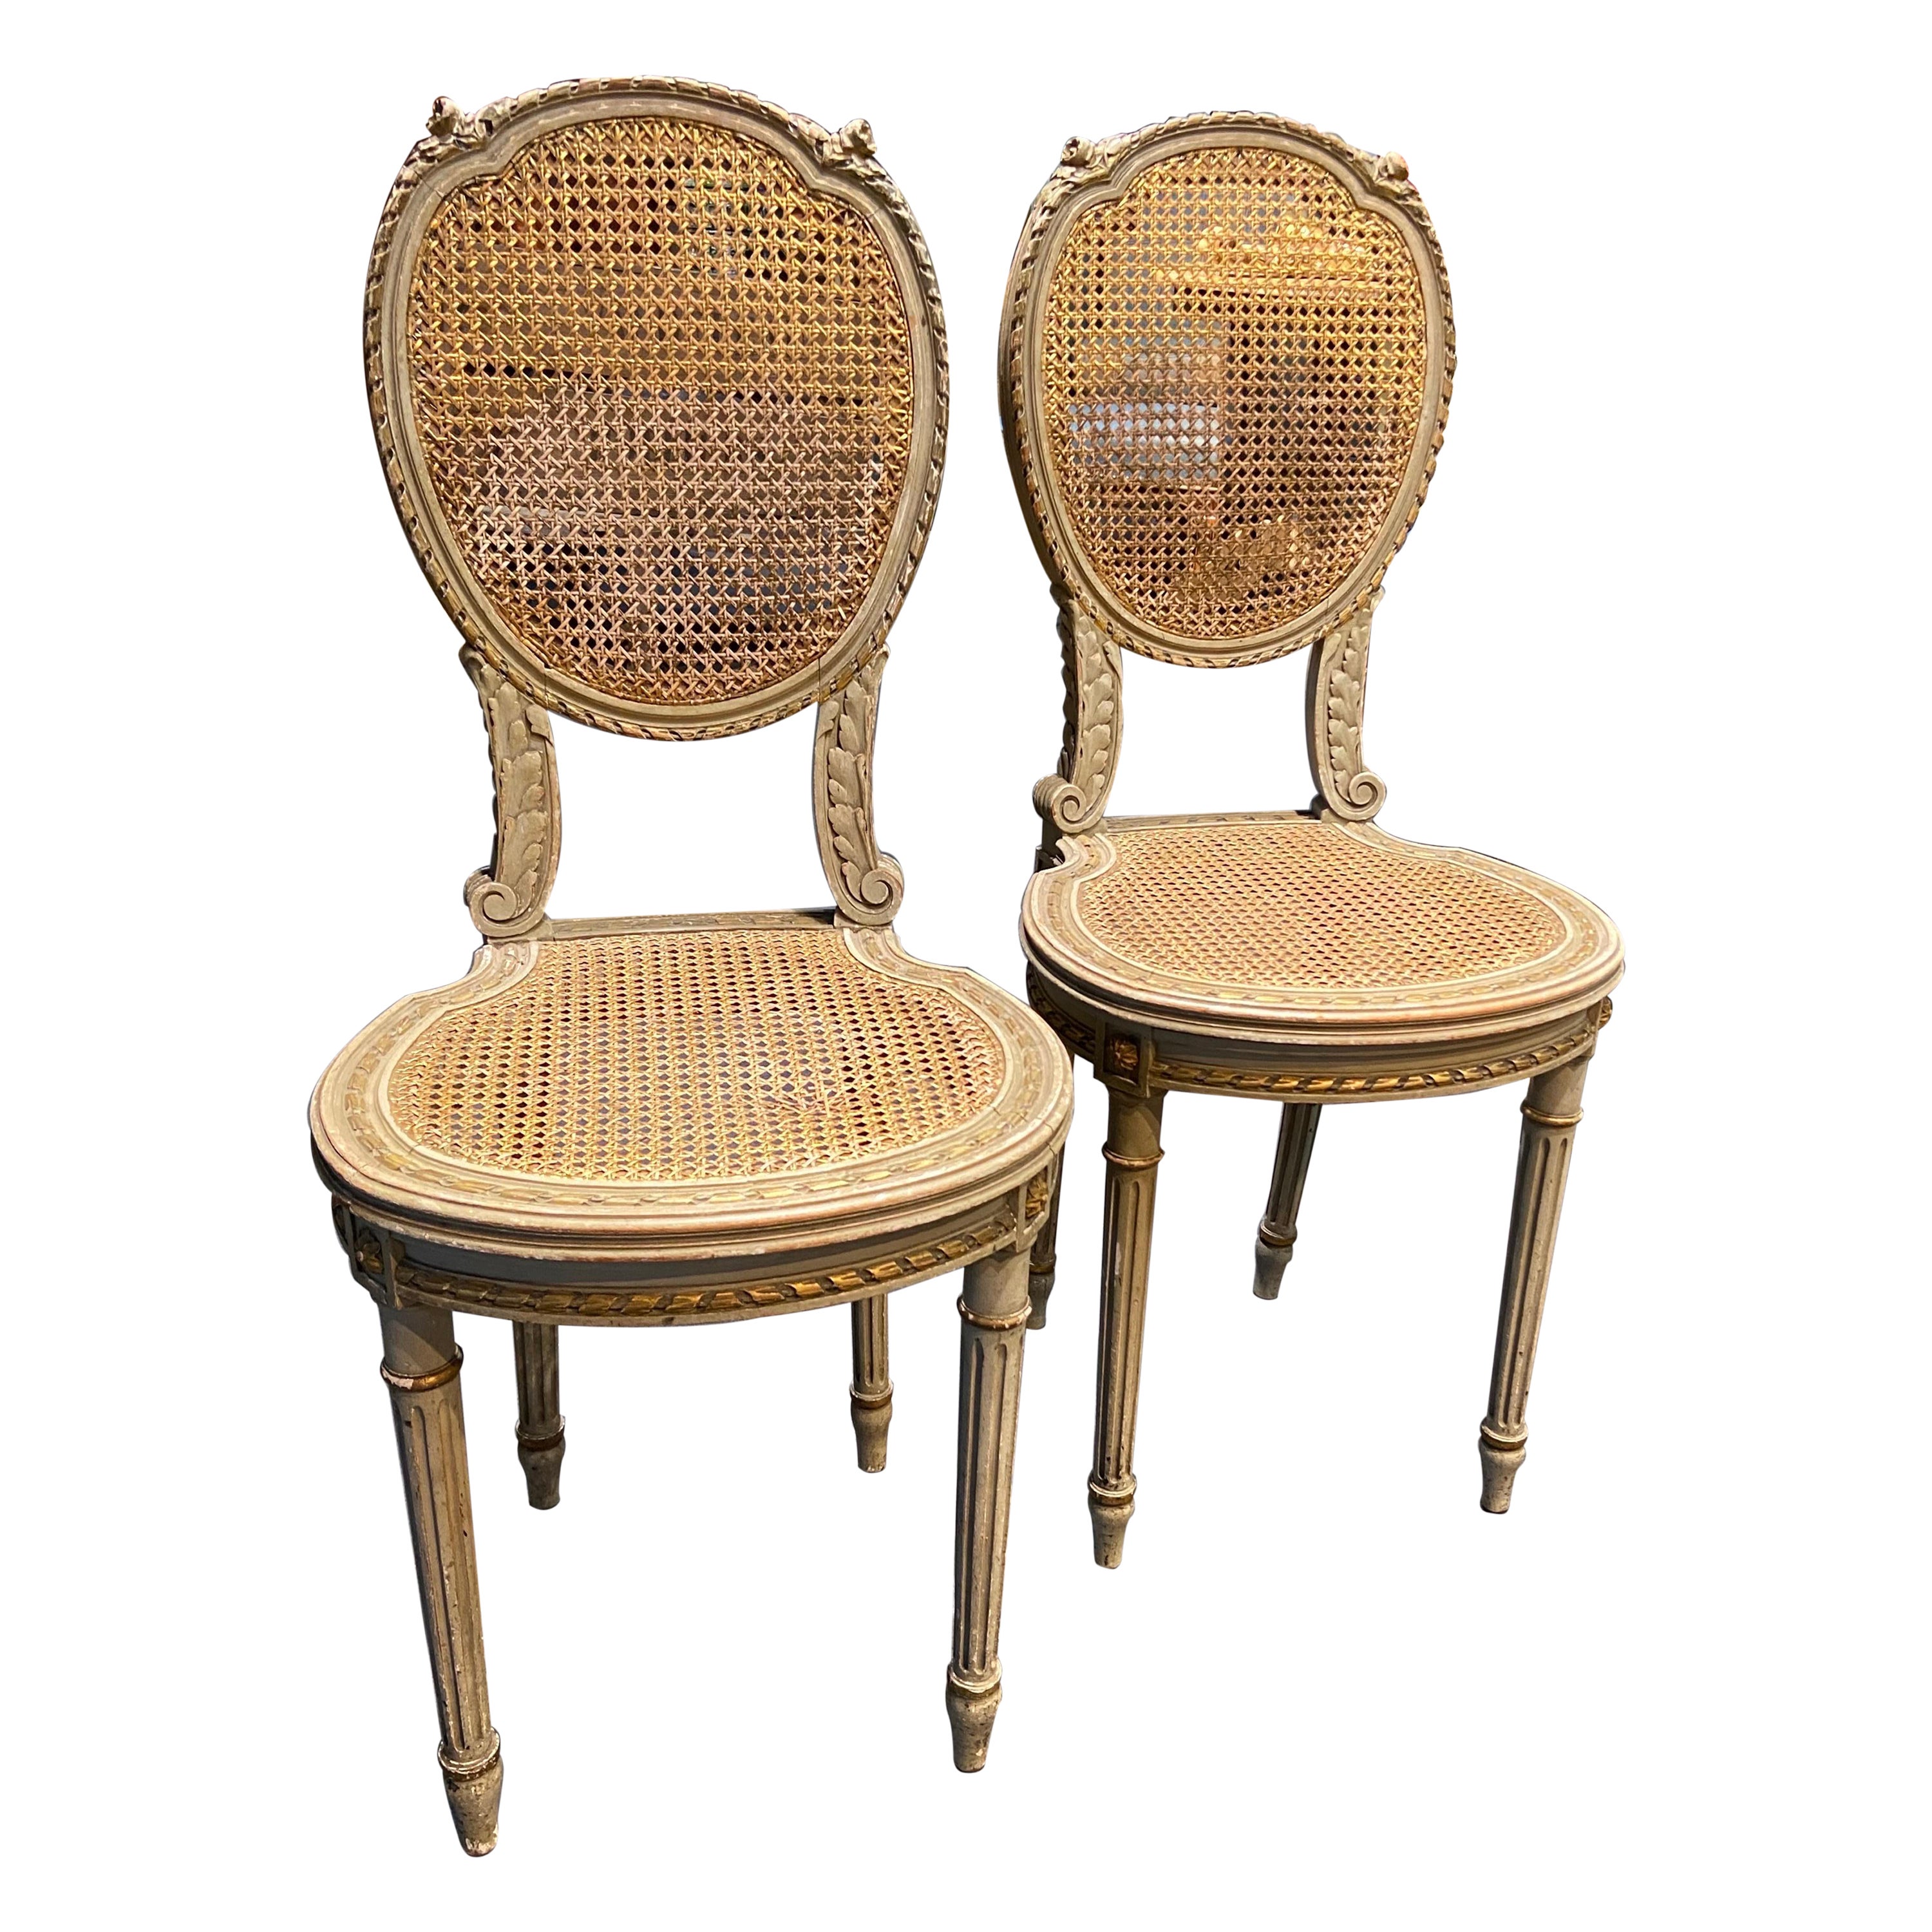 19th Century French Pair of Hand Carved Cane Chairs in Louis XVI Style